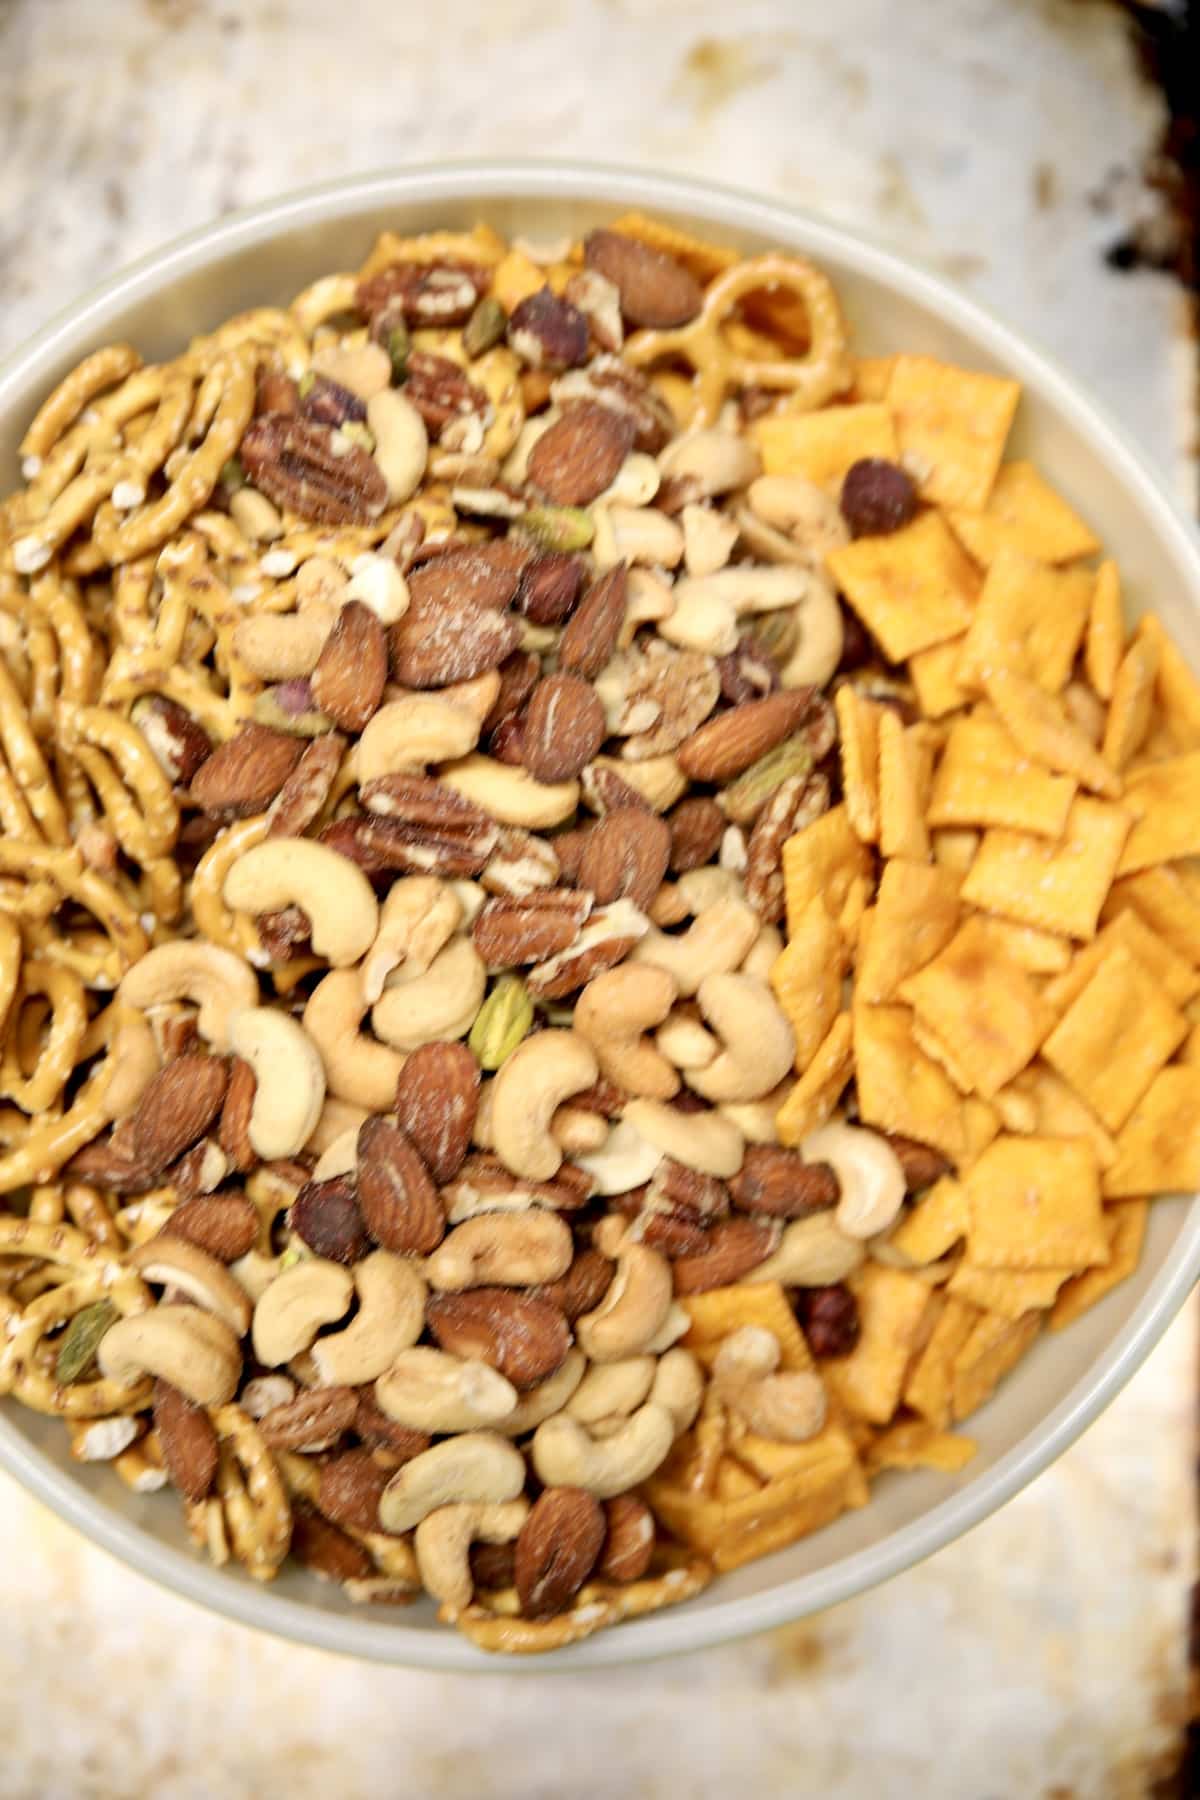 Bowl of cheese crackers, pretzels, nuts.